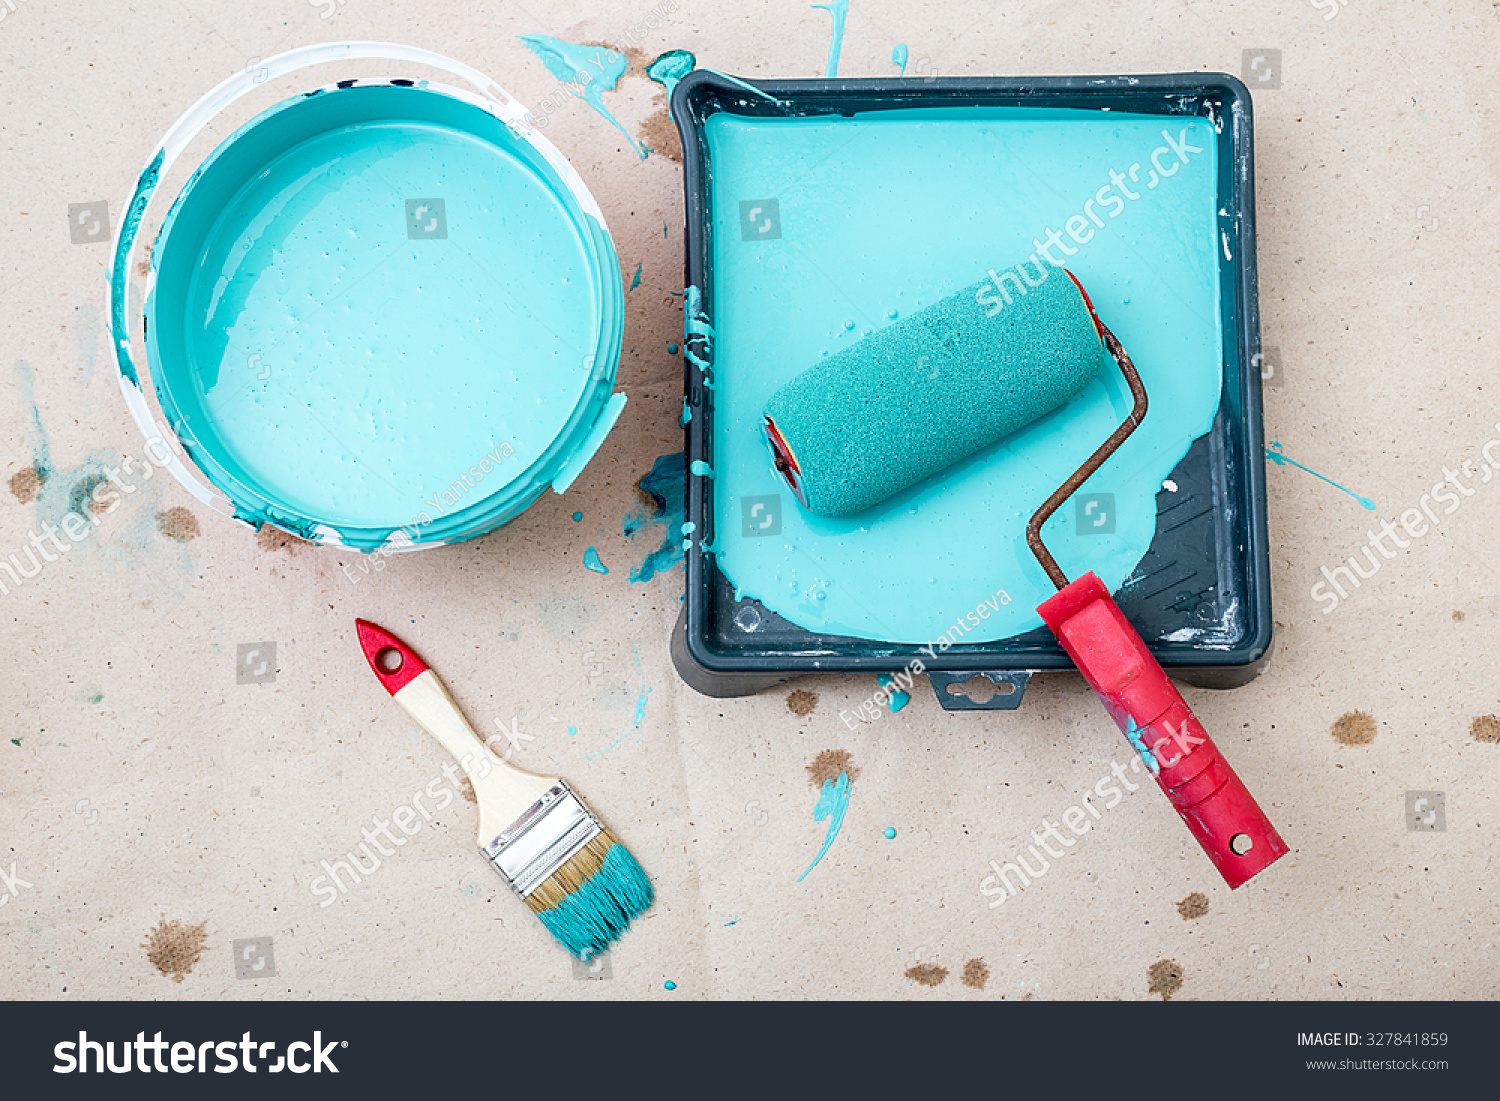 stock-photo-a-bucket-of-paint-and-a-brush-roller-paint-tray-327841859.jpg